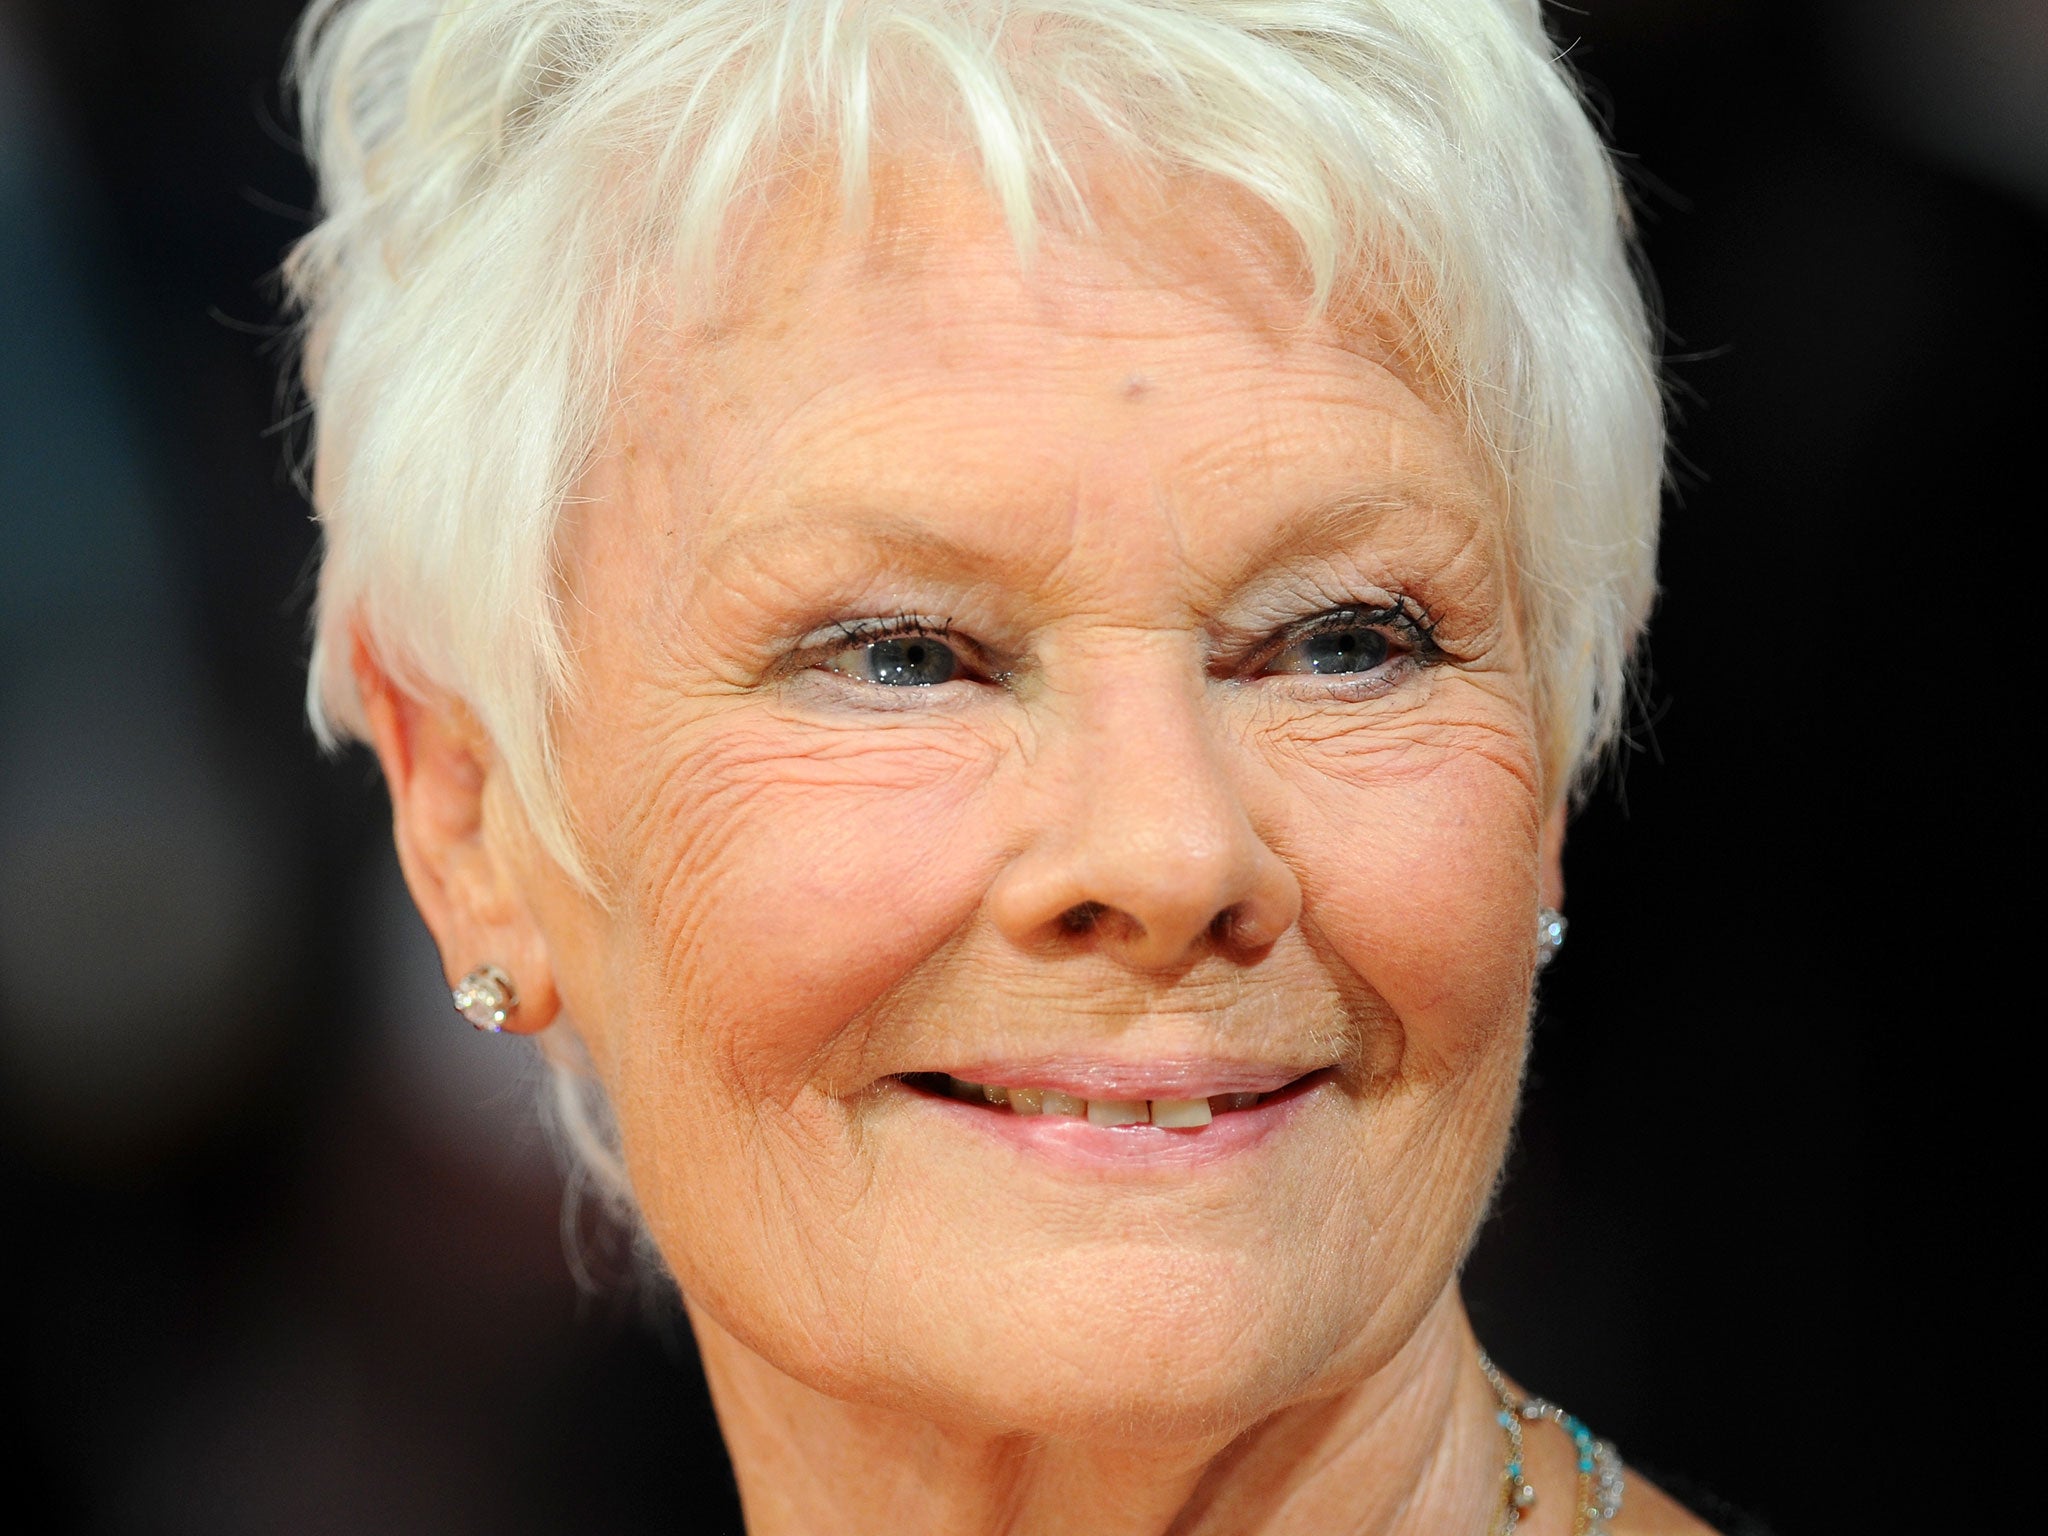 Judi Dench made her professional debut as Ophelia in Hamlet in 1957